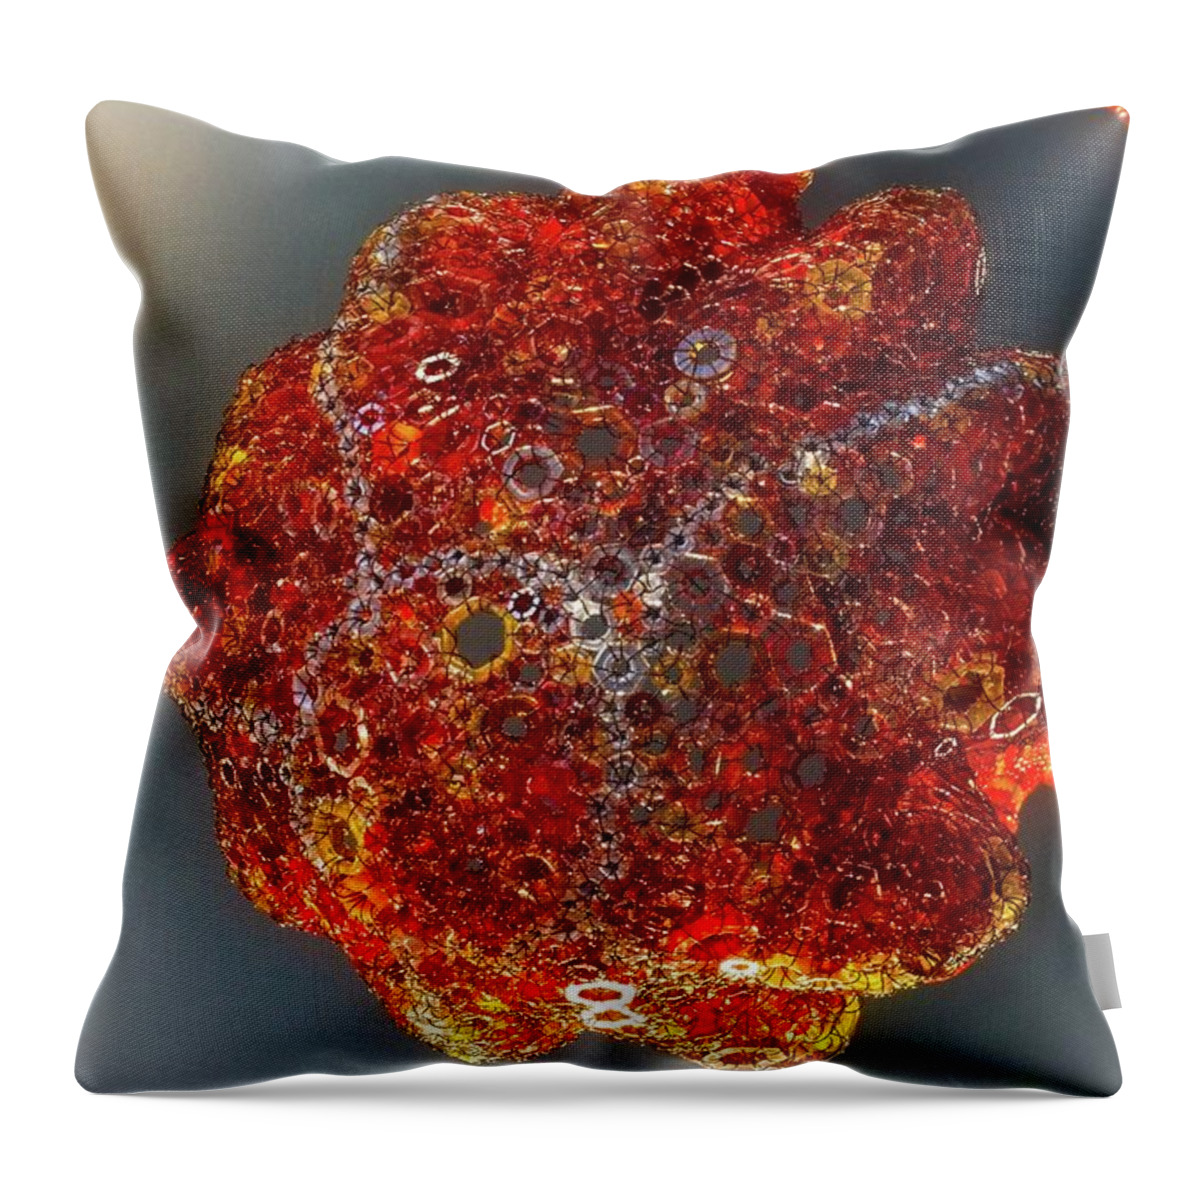 Floating Throw Pillow featuring the digital art Crystal Jelly by David Desautel